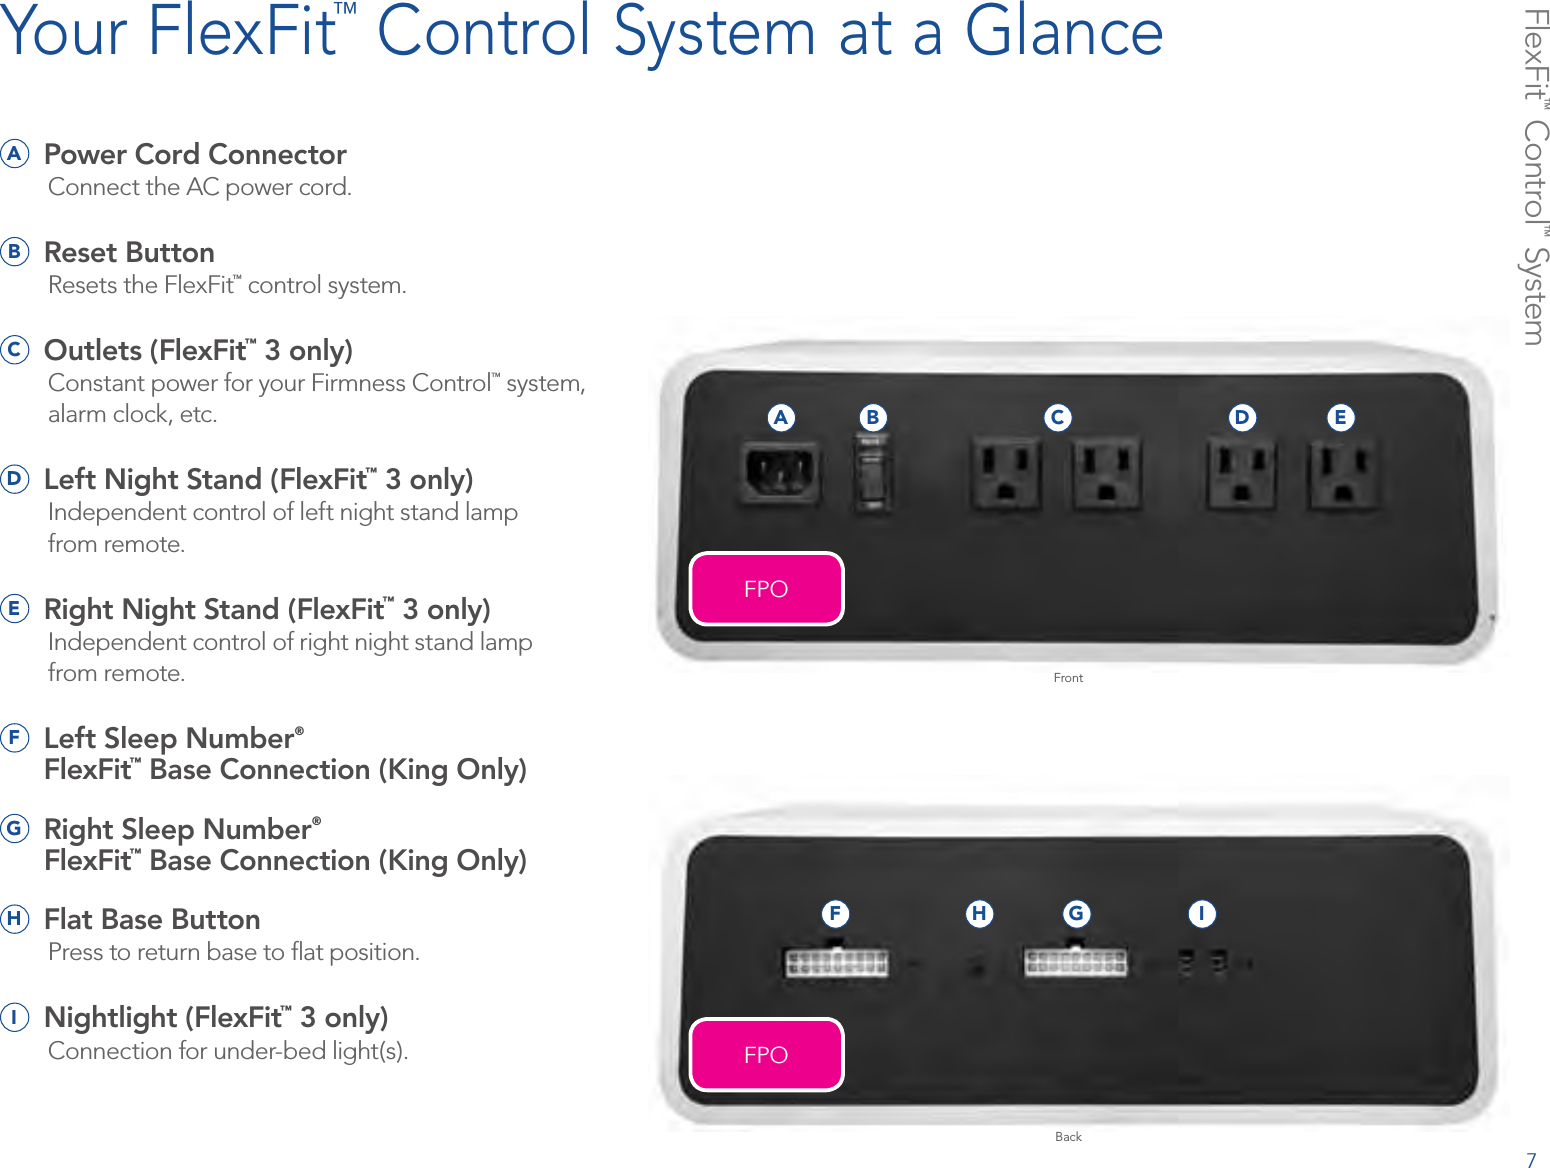 FlexFit™ Control™ SystemYour FlexFit™ Control System at a GlanceA  Power Cord ConnectorConnect the AC power cord.B  Reset ButtonResets the FlexFit™ control system.C  Outlets (FlexFit™ 3 only)Constant power for your Firmness Control™ system, alarm clock, etc.D  Left Night Stand (FlexFit™ 3 only)Independent control of left night stand lamp  from remote.E  Right Night Stand (FlexFit™ 3 only)Independent control of right night stand lamp  from remote.F   Left Sleep Number®  FlexFit™ Base Connection (King Only)G   Right Sleep Number®  FlexFit™ Base Connection (King Only)H  Flat Base ButtonPress to return base to ﬂat position.I  Nightlight (FlexFit™ 3 only)Connection for under-bed light(s).A B C D EF GH IFrontBackFPOFPO7